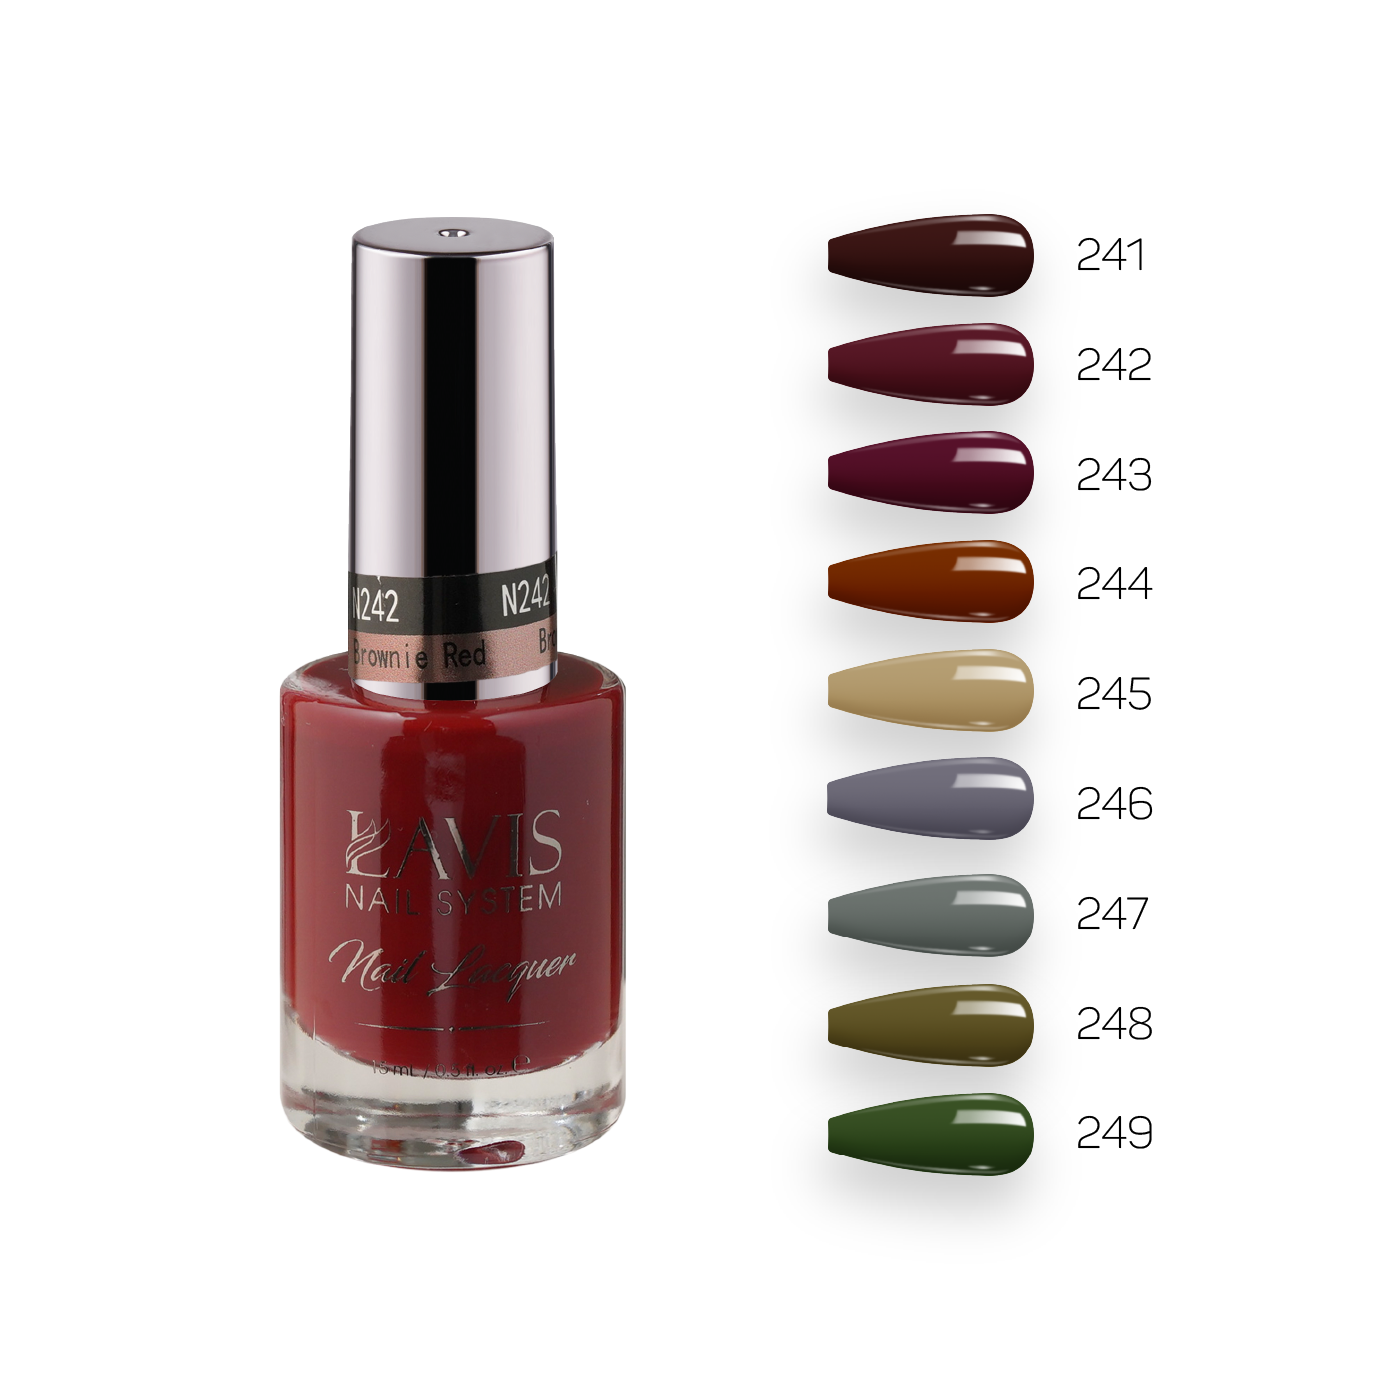  Lavis Healthy Nail Lacquer Fall Winter Set N2 (9 colors): 241, 242, 248, 244, 245, 248, 247, 248, 248